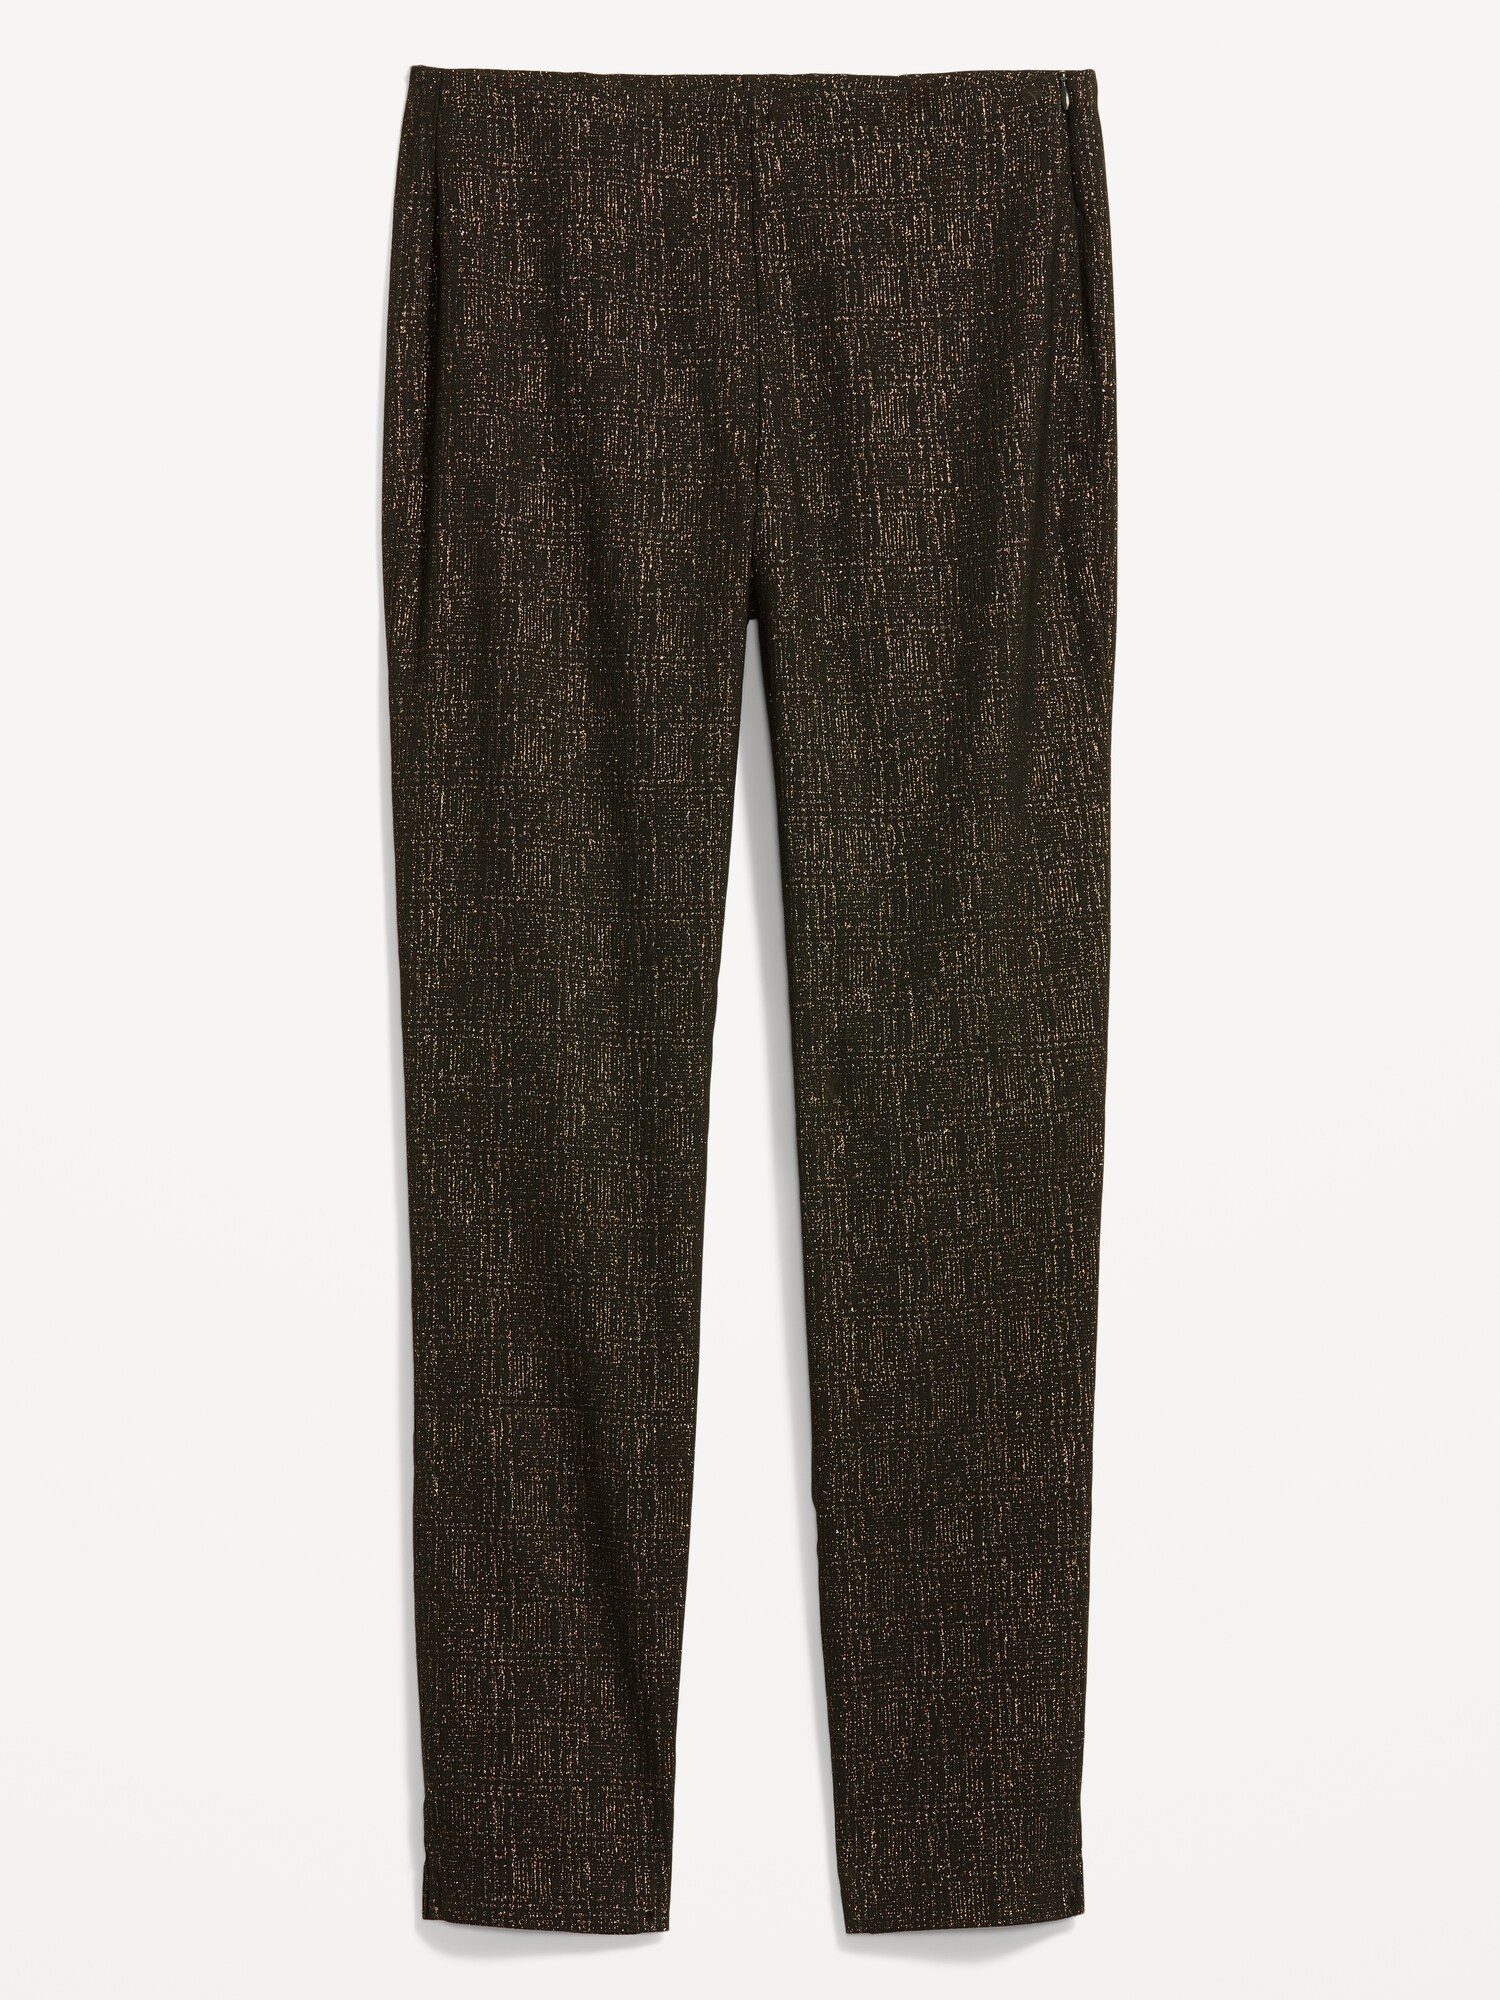 High-Waisted Pull-On Pixie Skinny Ankle Pants